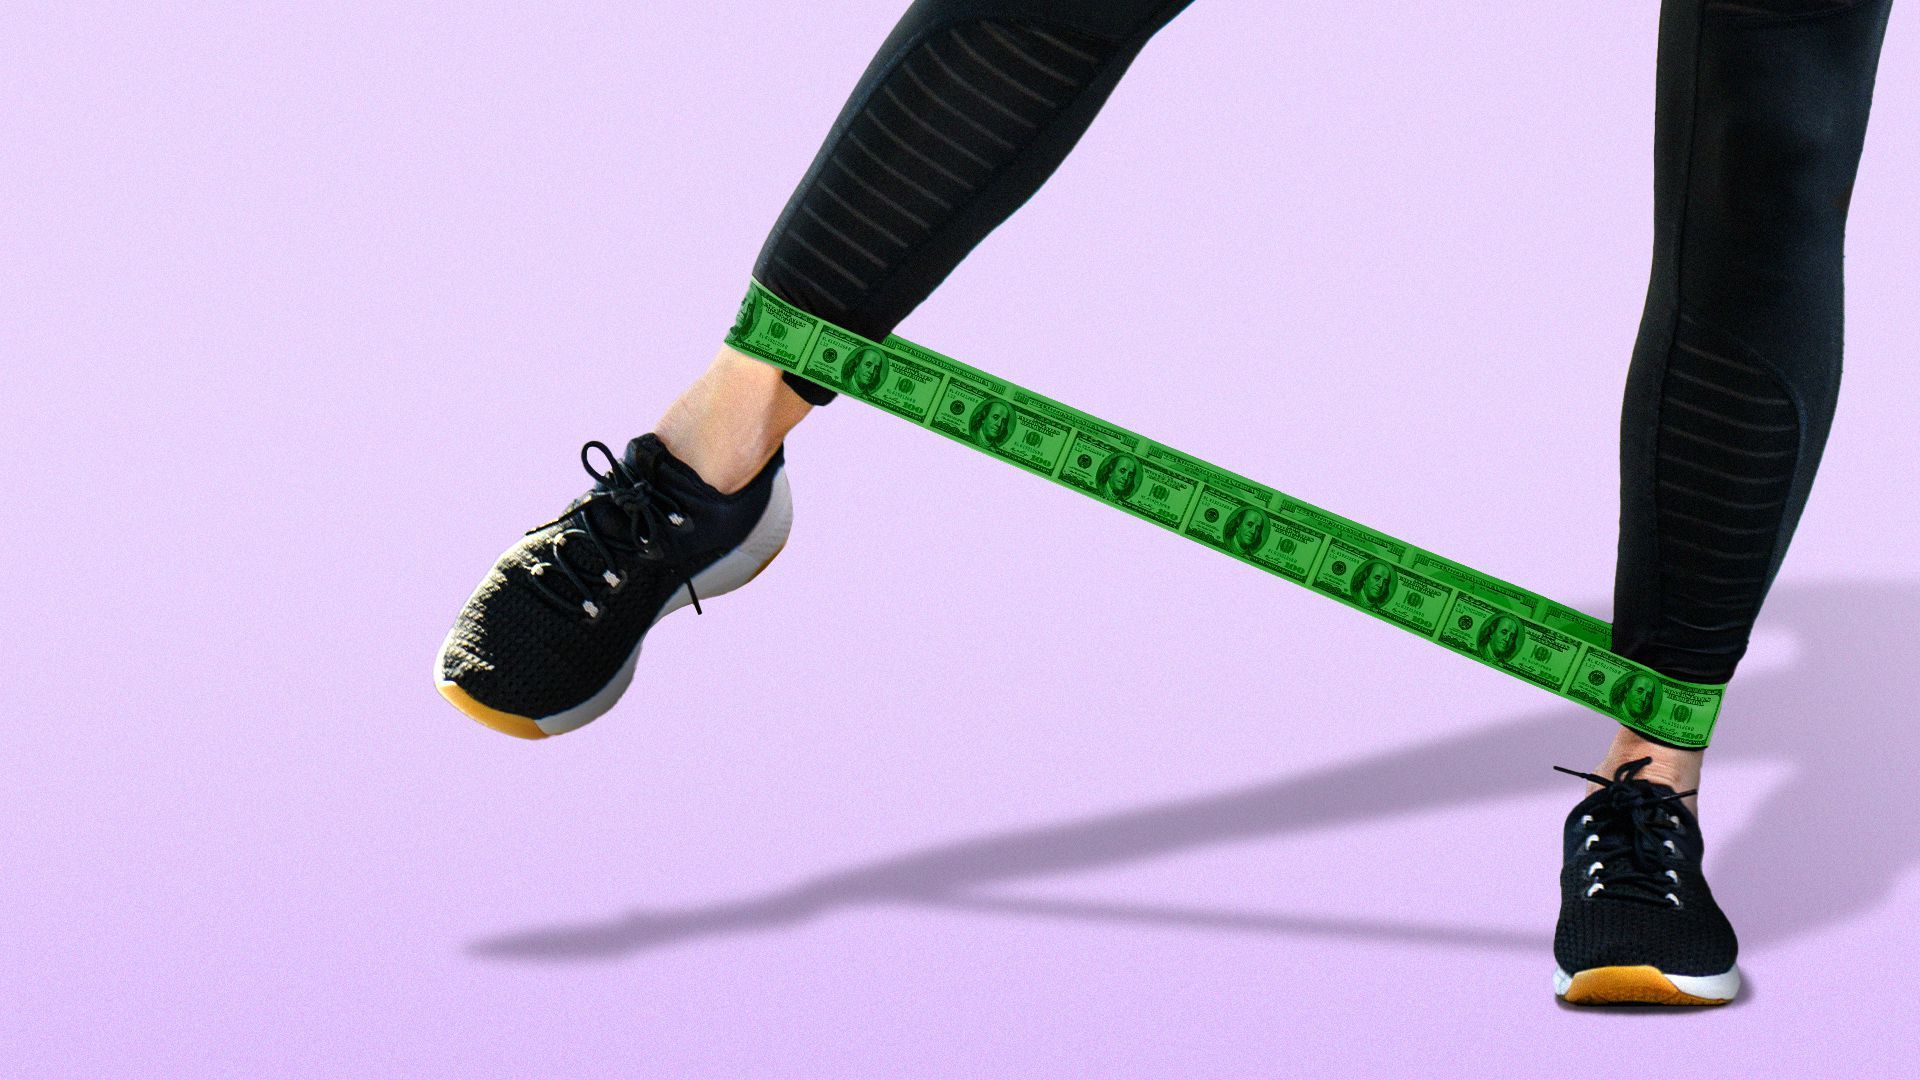 Illustration of a person using an exercise band made from $100 bills.